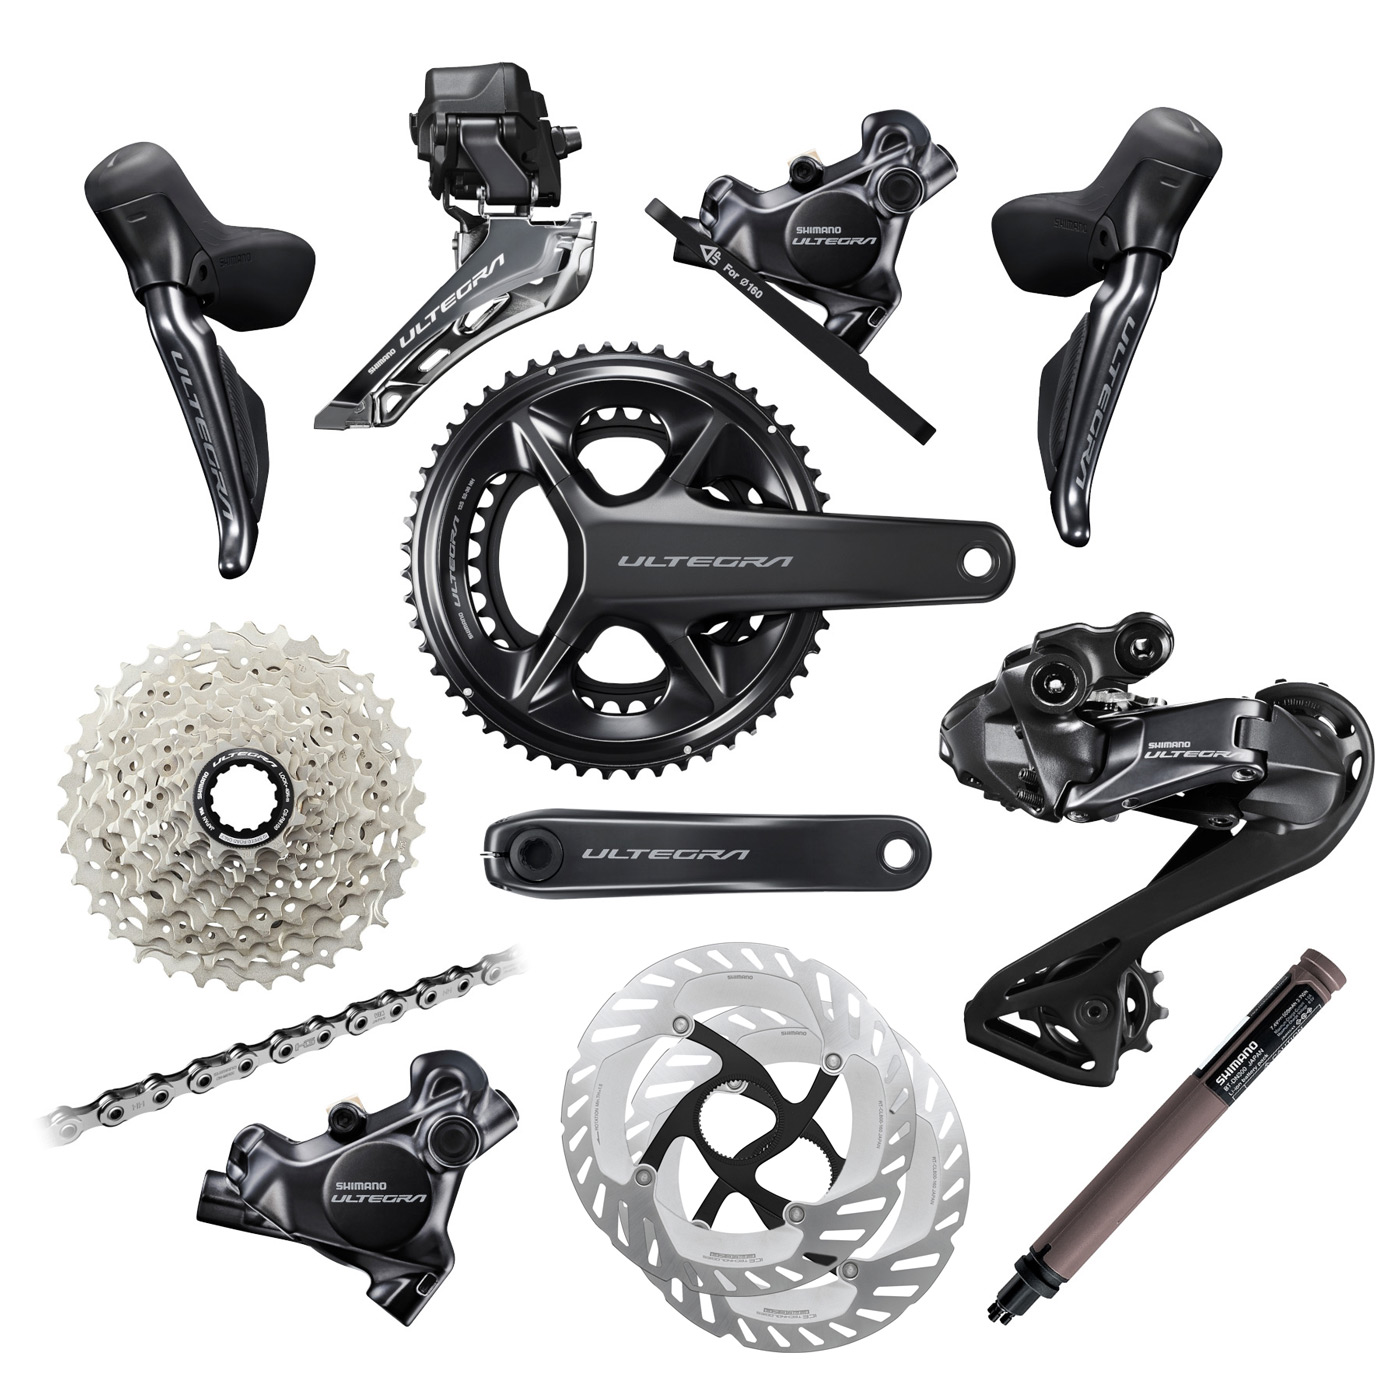 Picture of Shimano Ultegra Di2 R8100 Groupset - 2x12-speed - Special Offer - 50/34 | 172.5 mm | 11-34